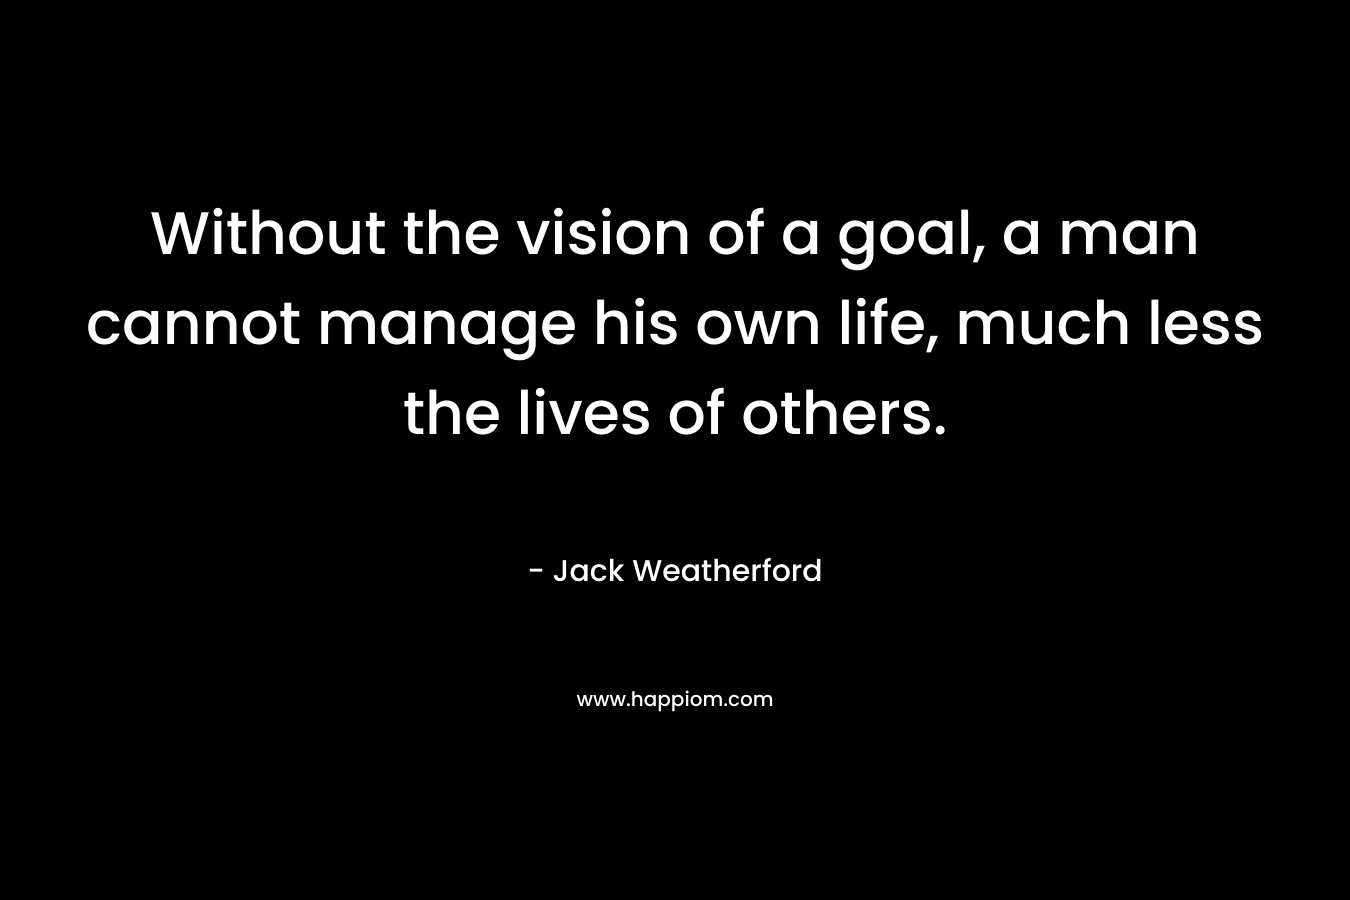 Without the vision of a goal, a man cannot manage his own life, much less the lives of others.